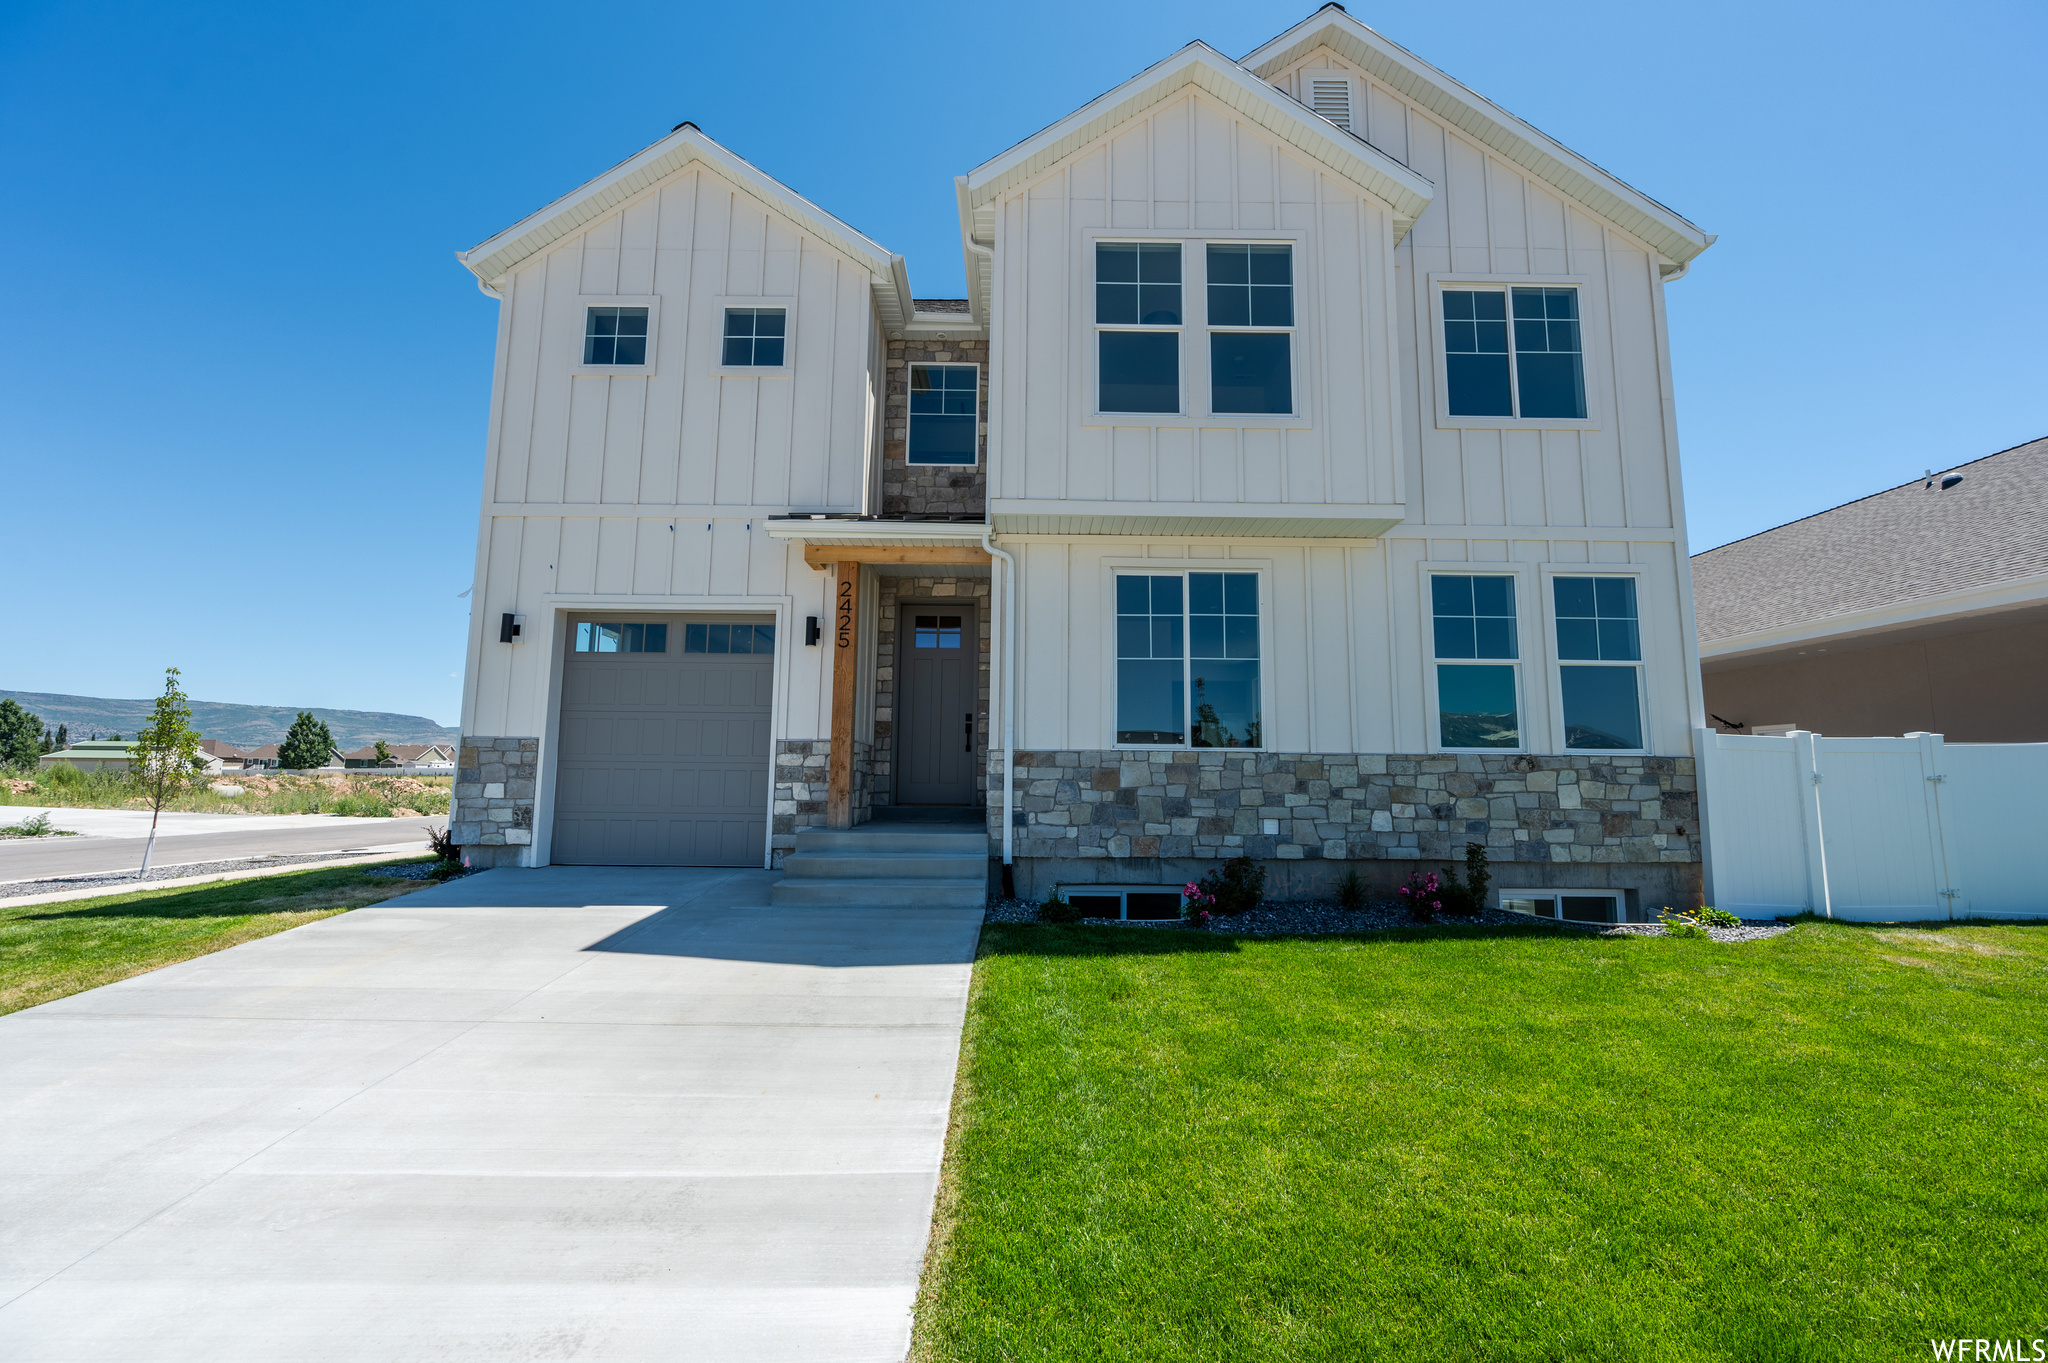 2425 S ORCHARD, Heber City, Utah 84032, 4 Bedrooms Bedrooms, 12 Rooms Rooms,3 BathroomsBathrooms,Residential,For sale,ORCHARD,1890437